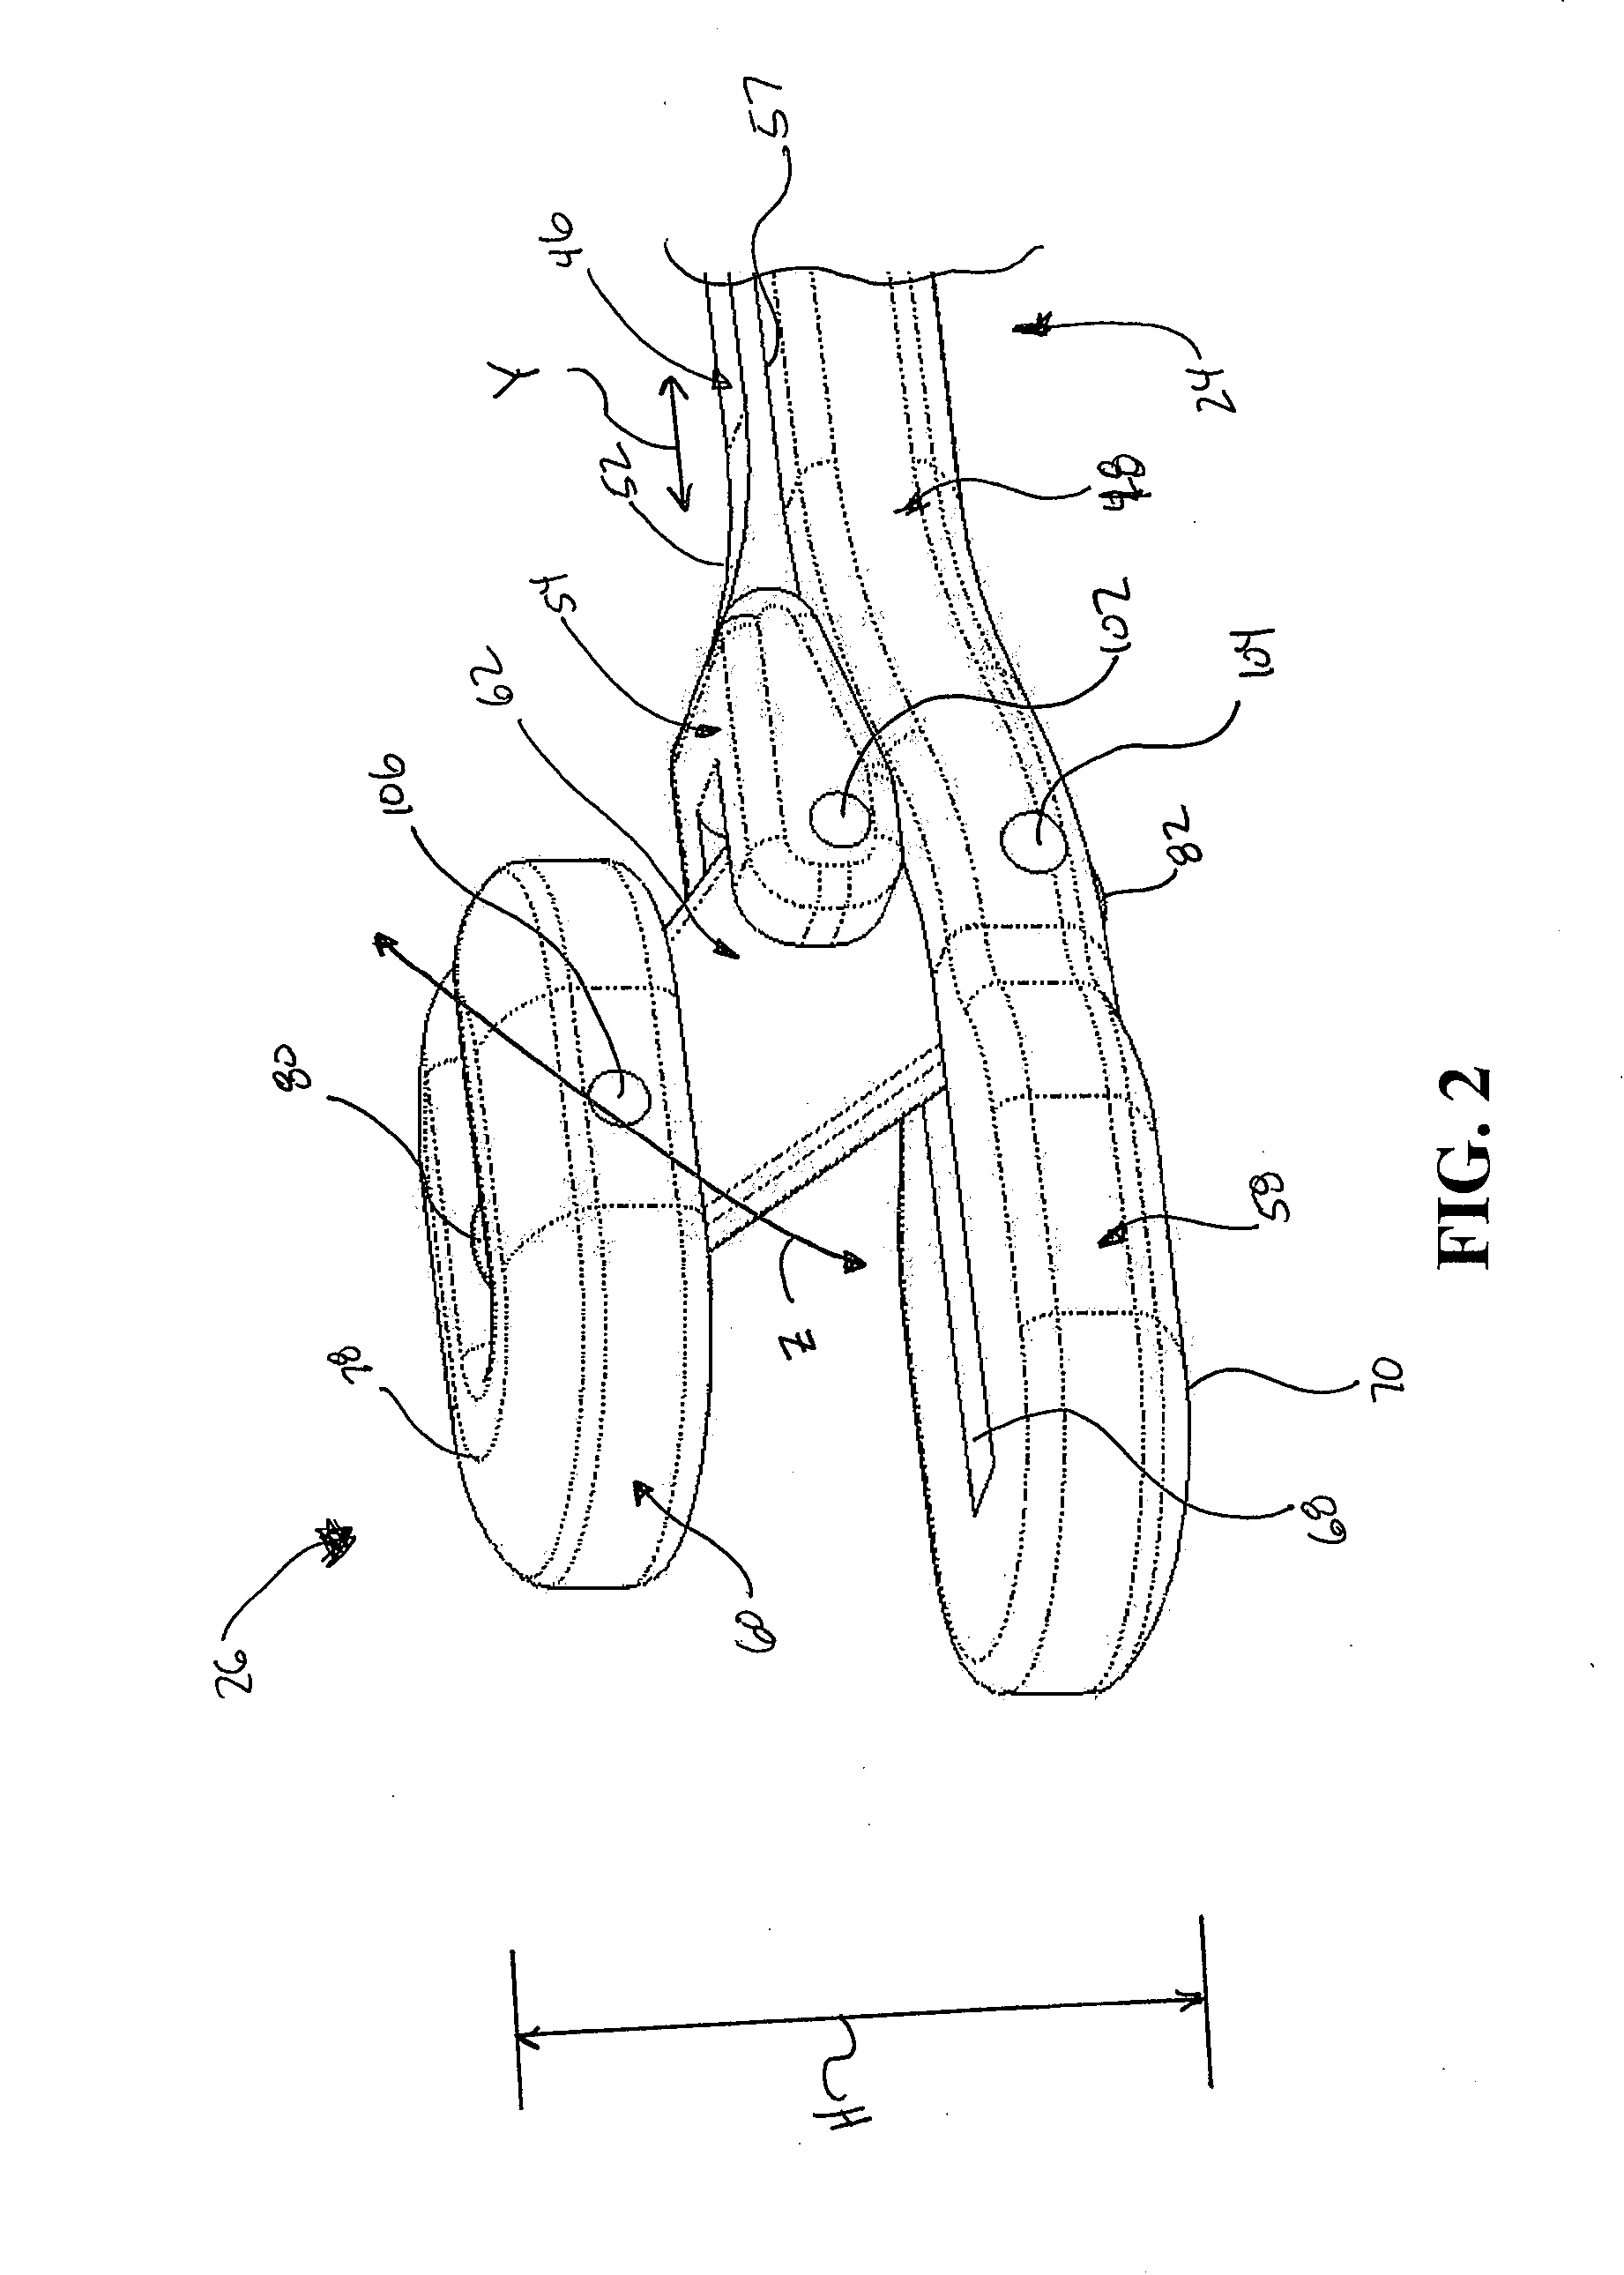 Sizing instrument for a bodily joint such as an intervertebral disc space